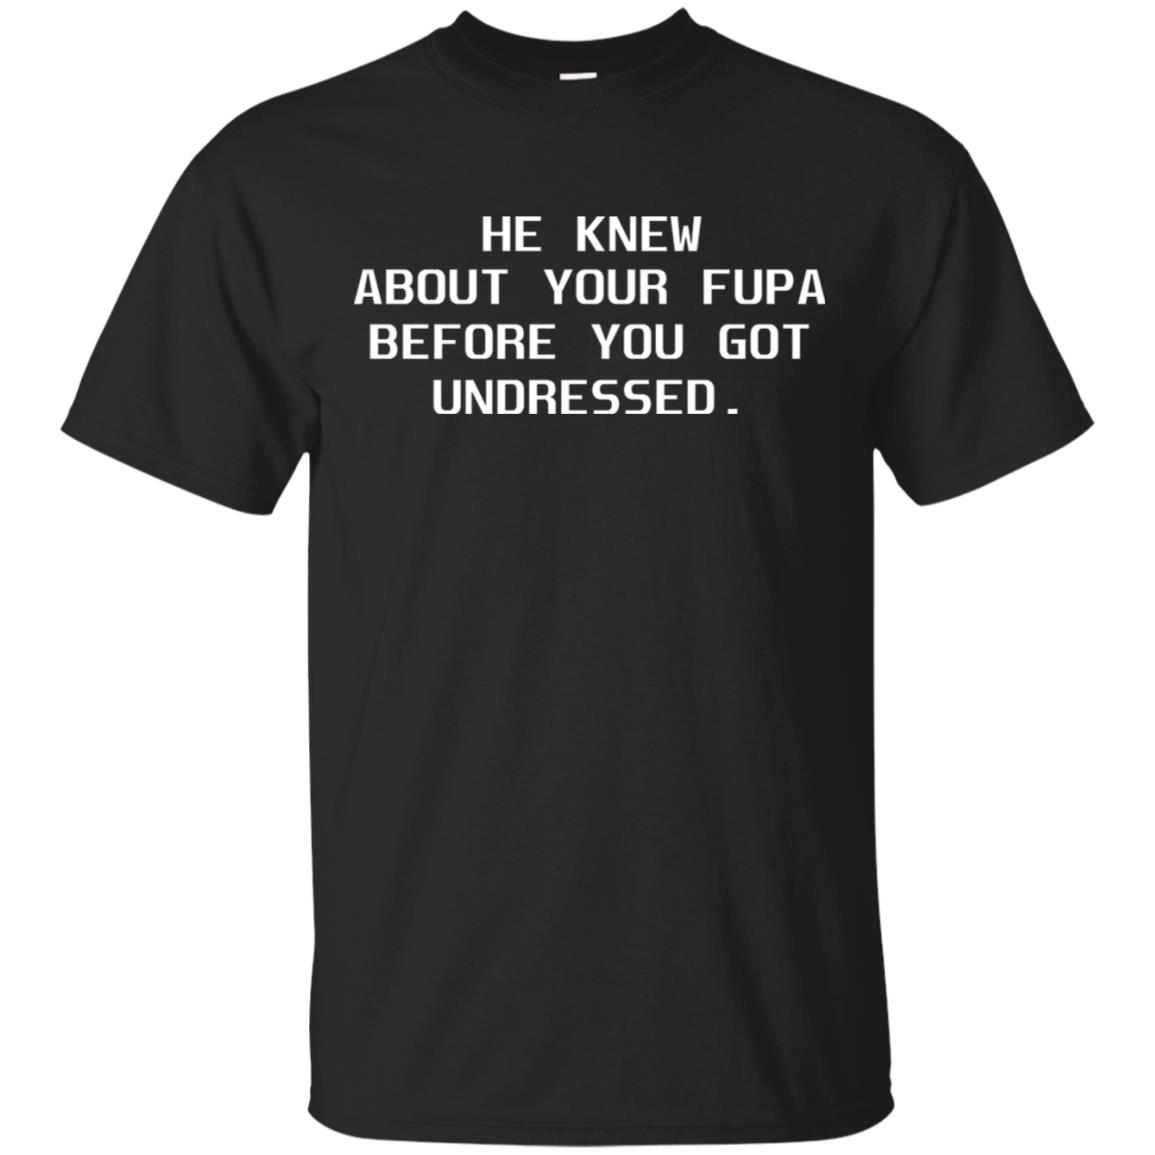 Fupa Shirt He Knew About Your Fupa Before You Undressed 2